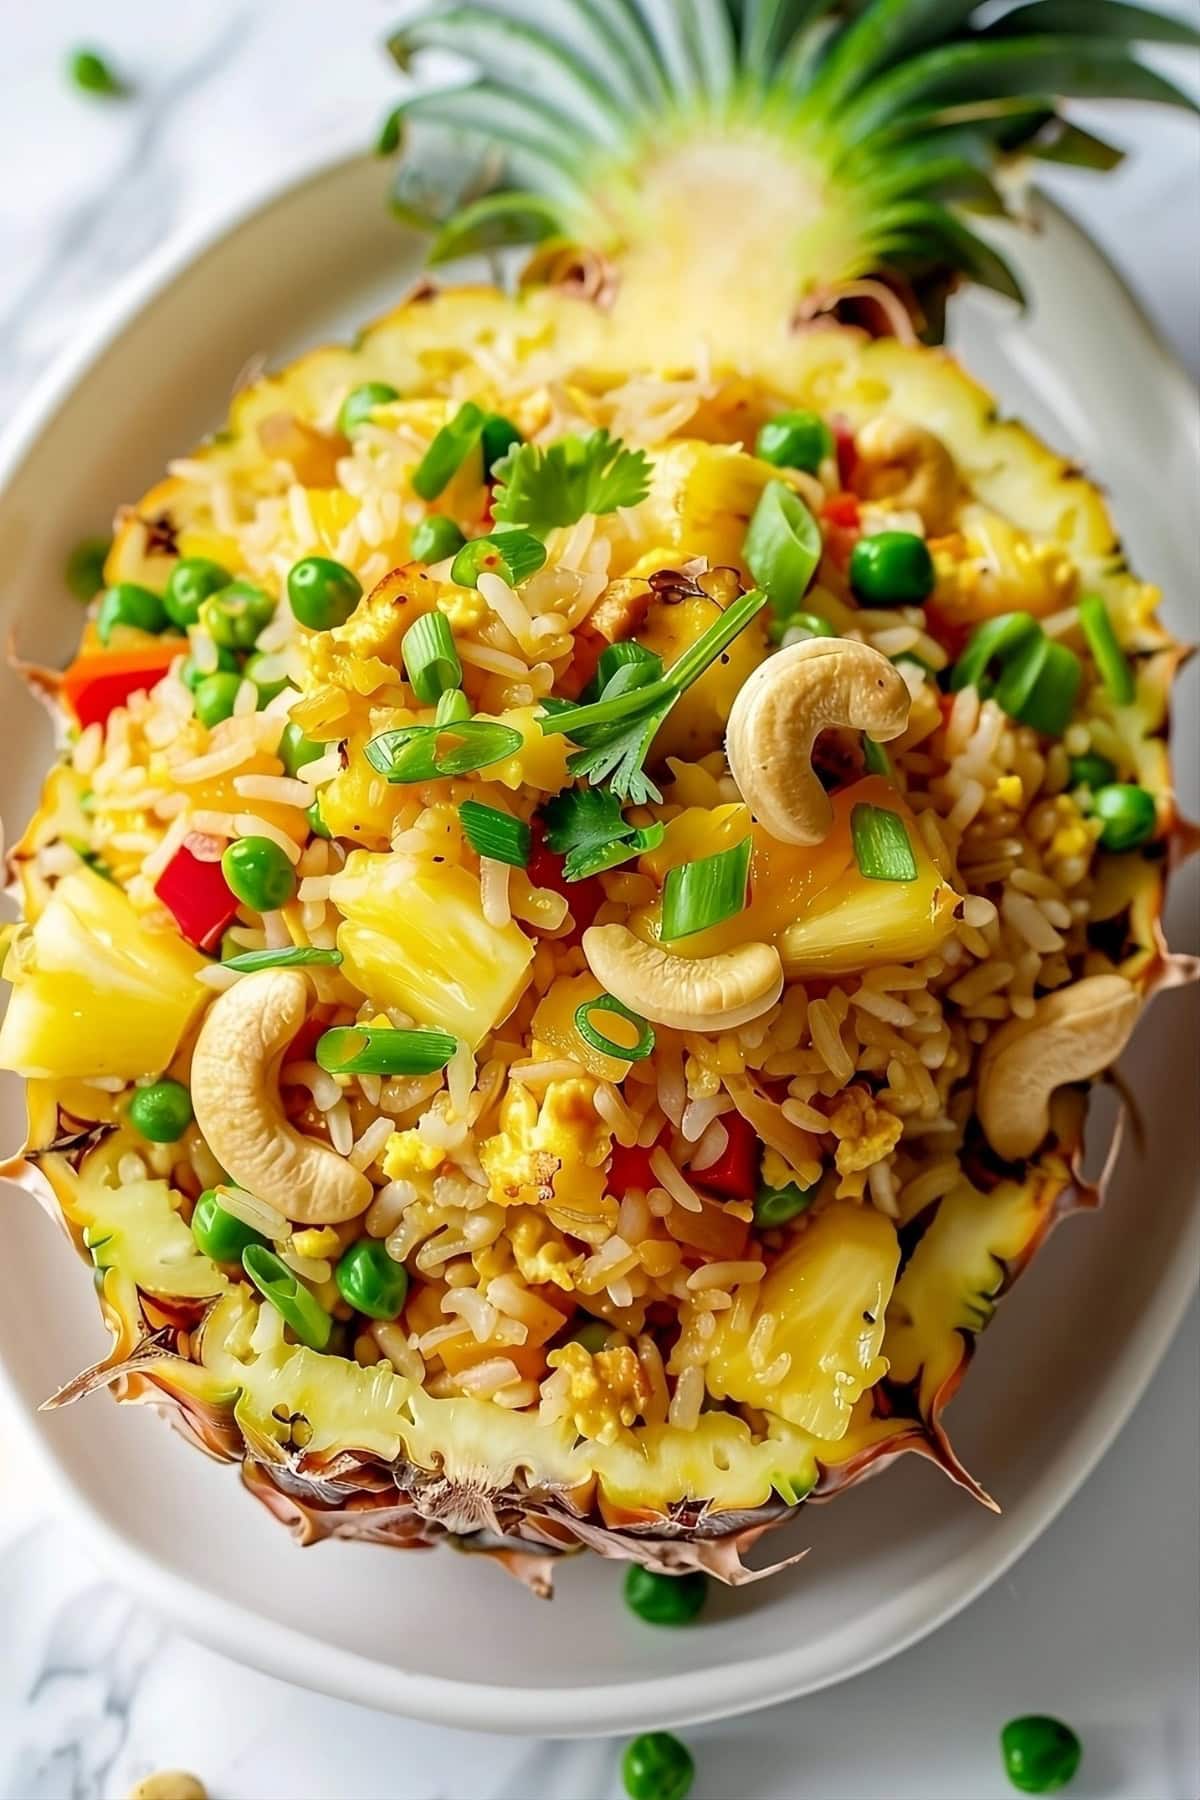 Fried rice served in a pineapple halves.